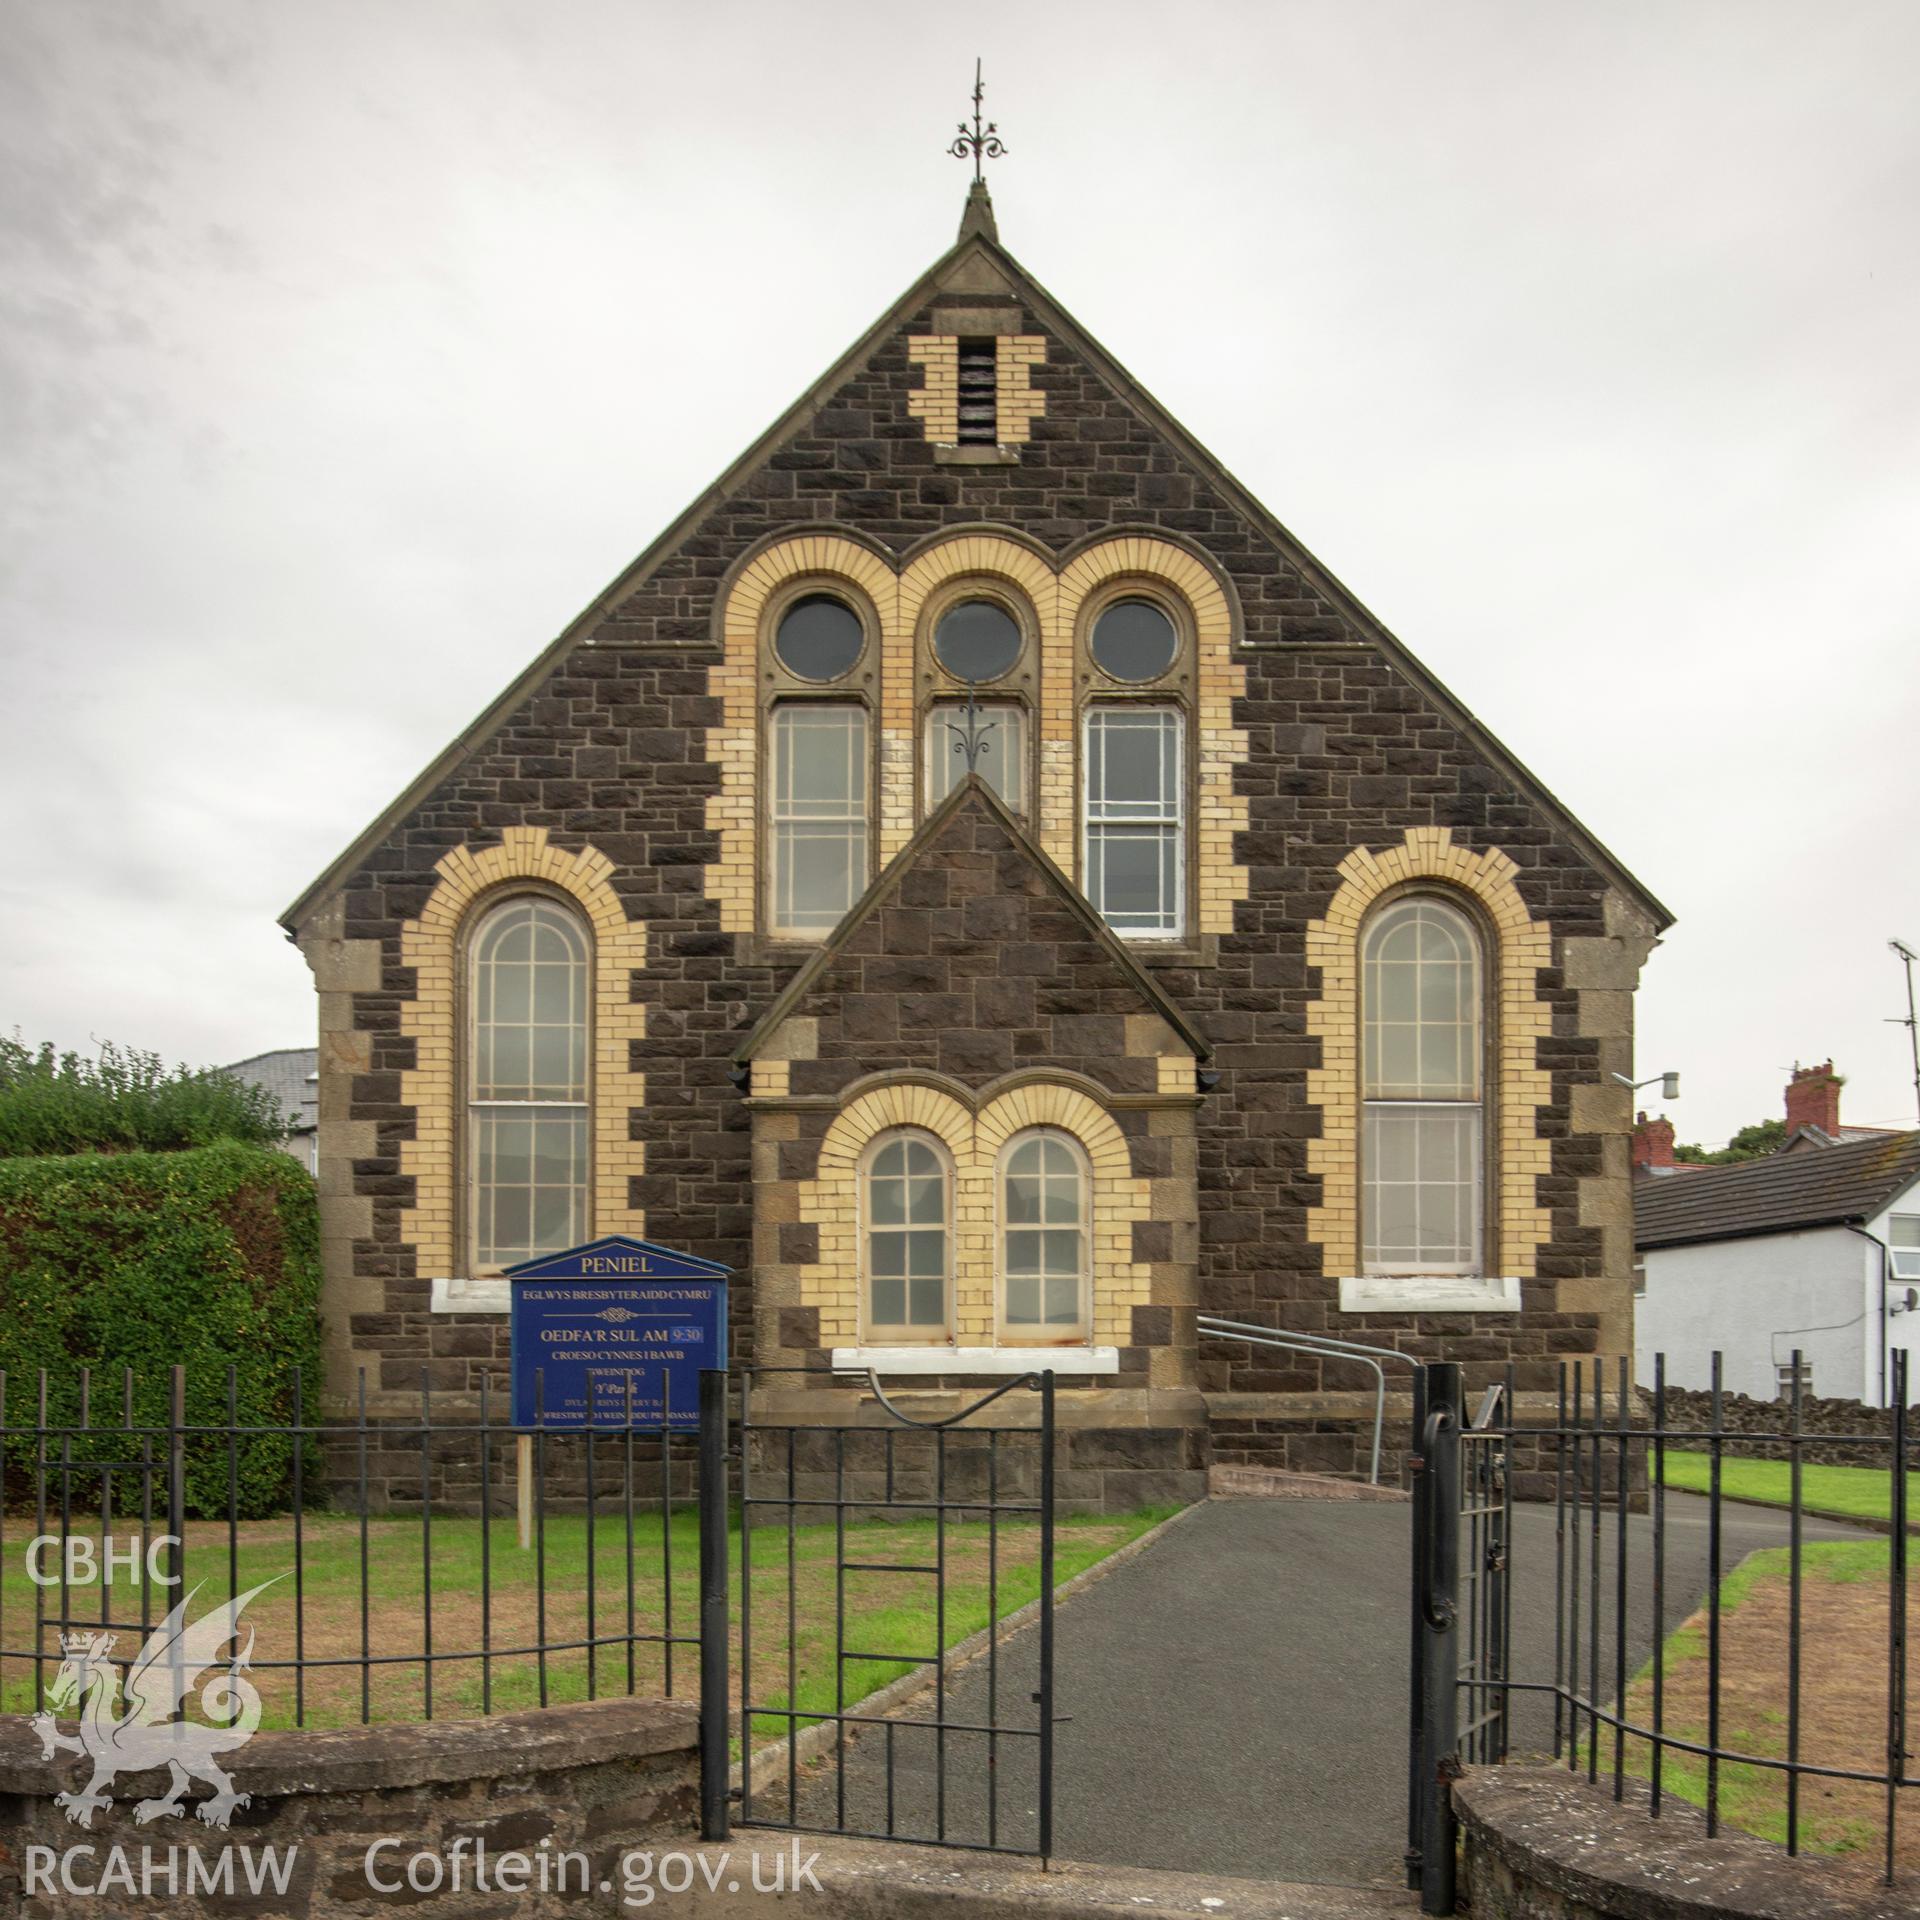 Colour photograph showing front elevation of Peniel Welsh Calvinistic Methodist Chapel, Ty Mawr Road and Peniel Street, Deganwy, Llandudno. Photographed by Richard Barrett on 17th September 2018.